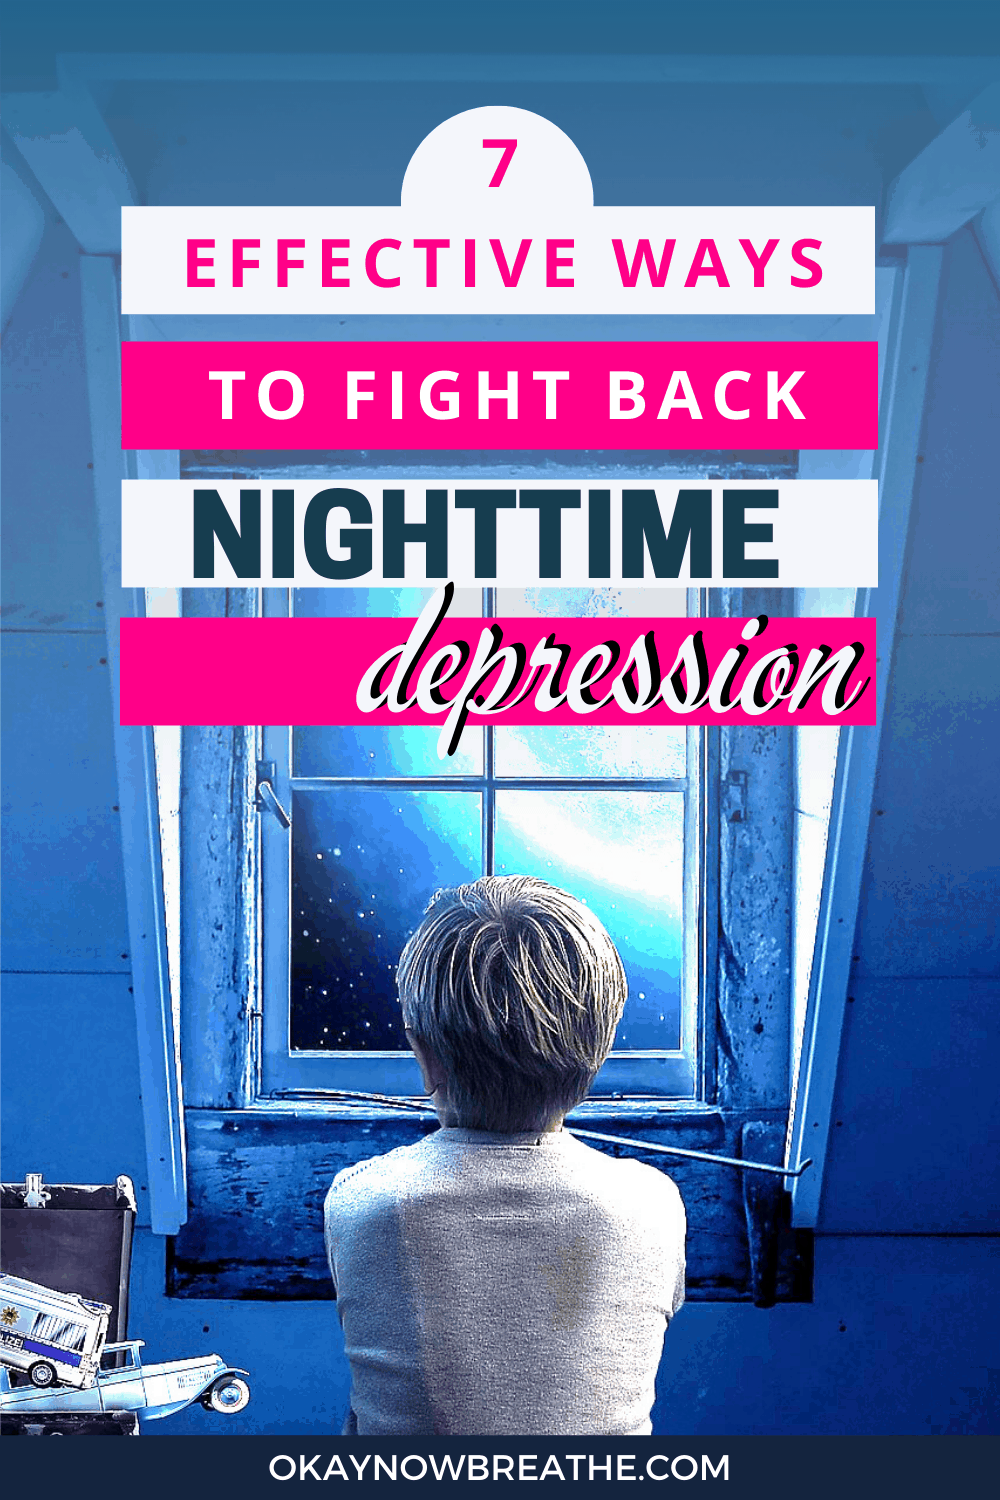 Boy looking out the window at the moon. Title overlay says 7 effective ways to fight back nighttime depression